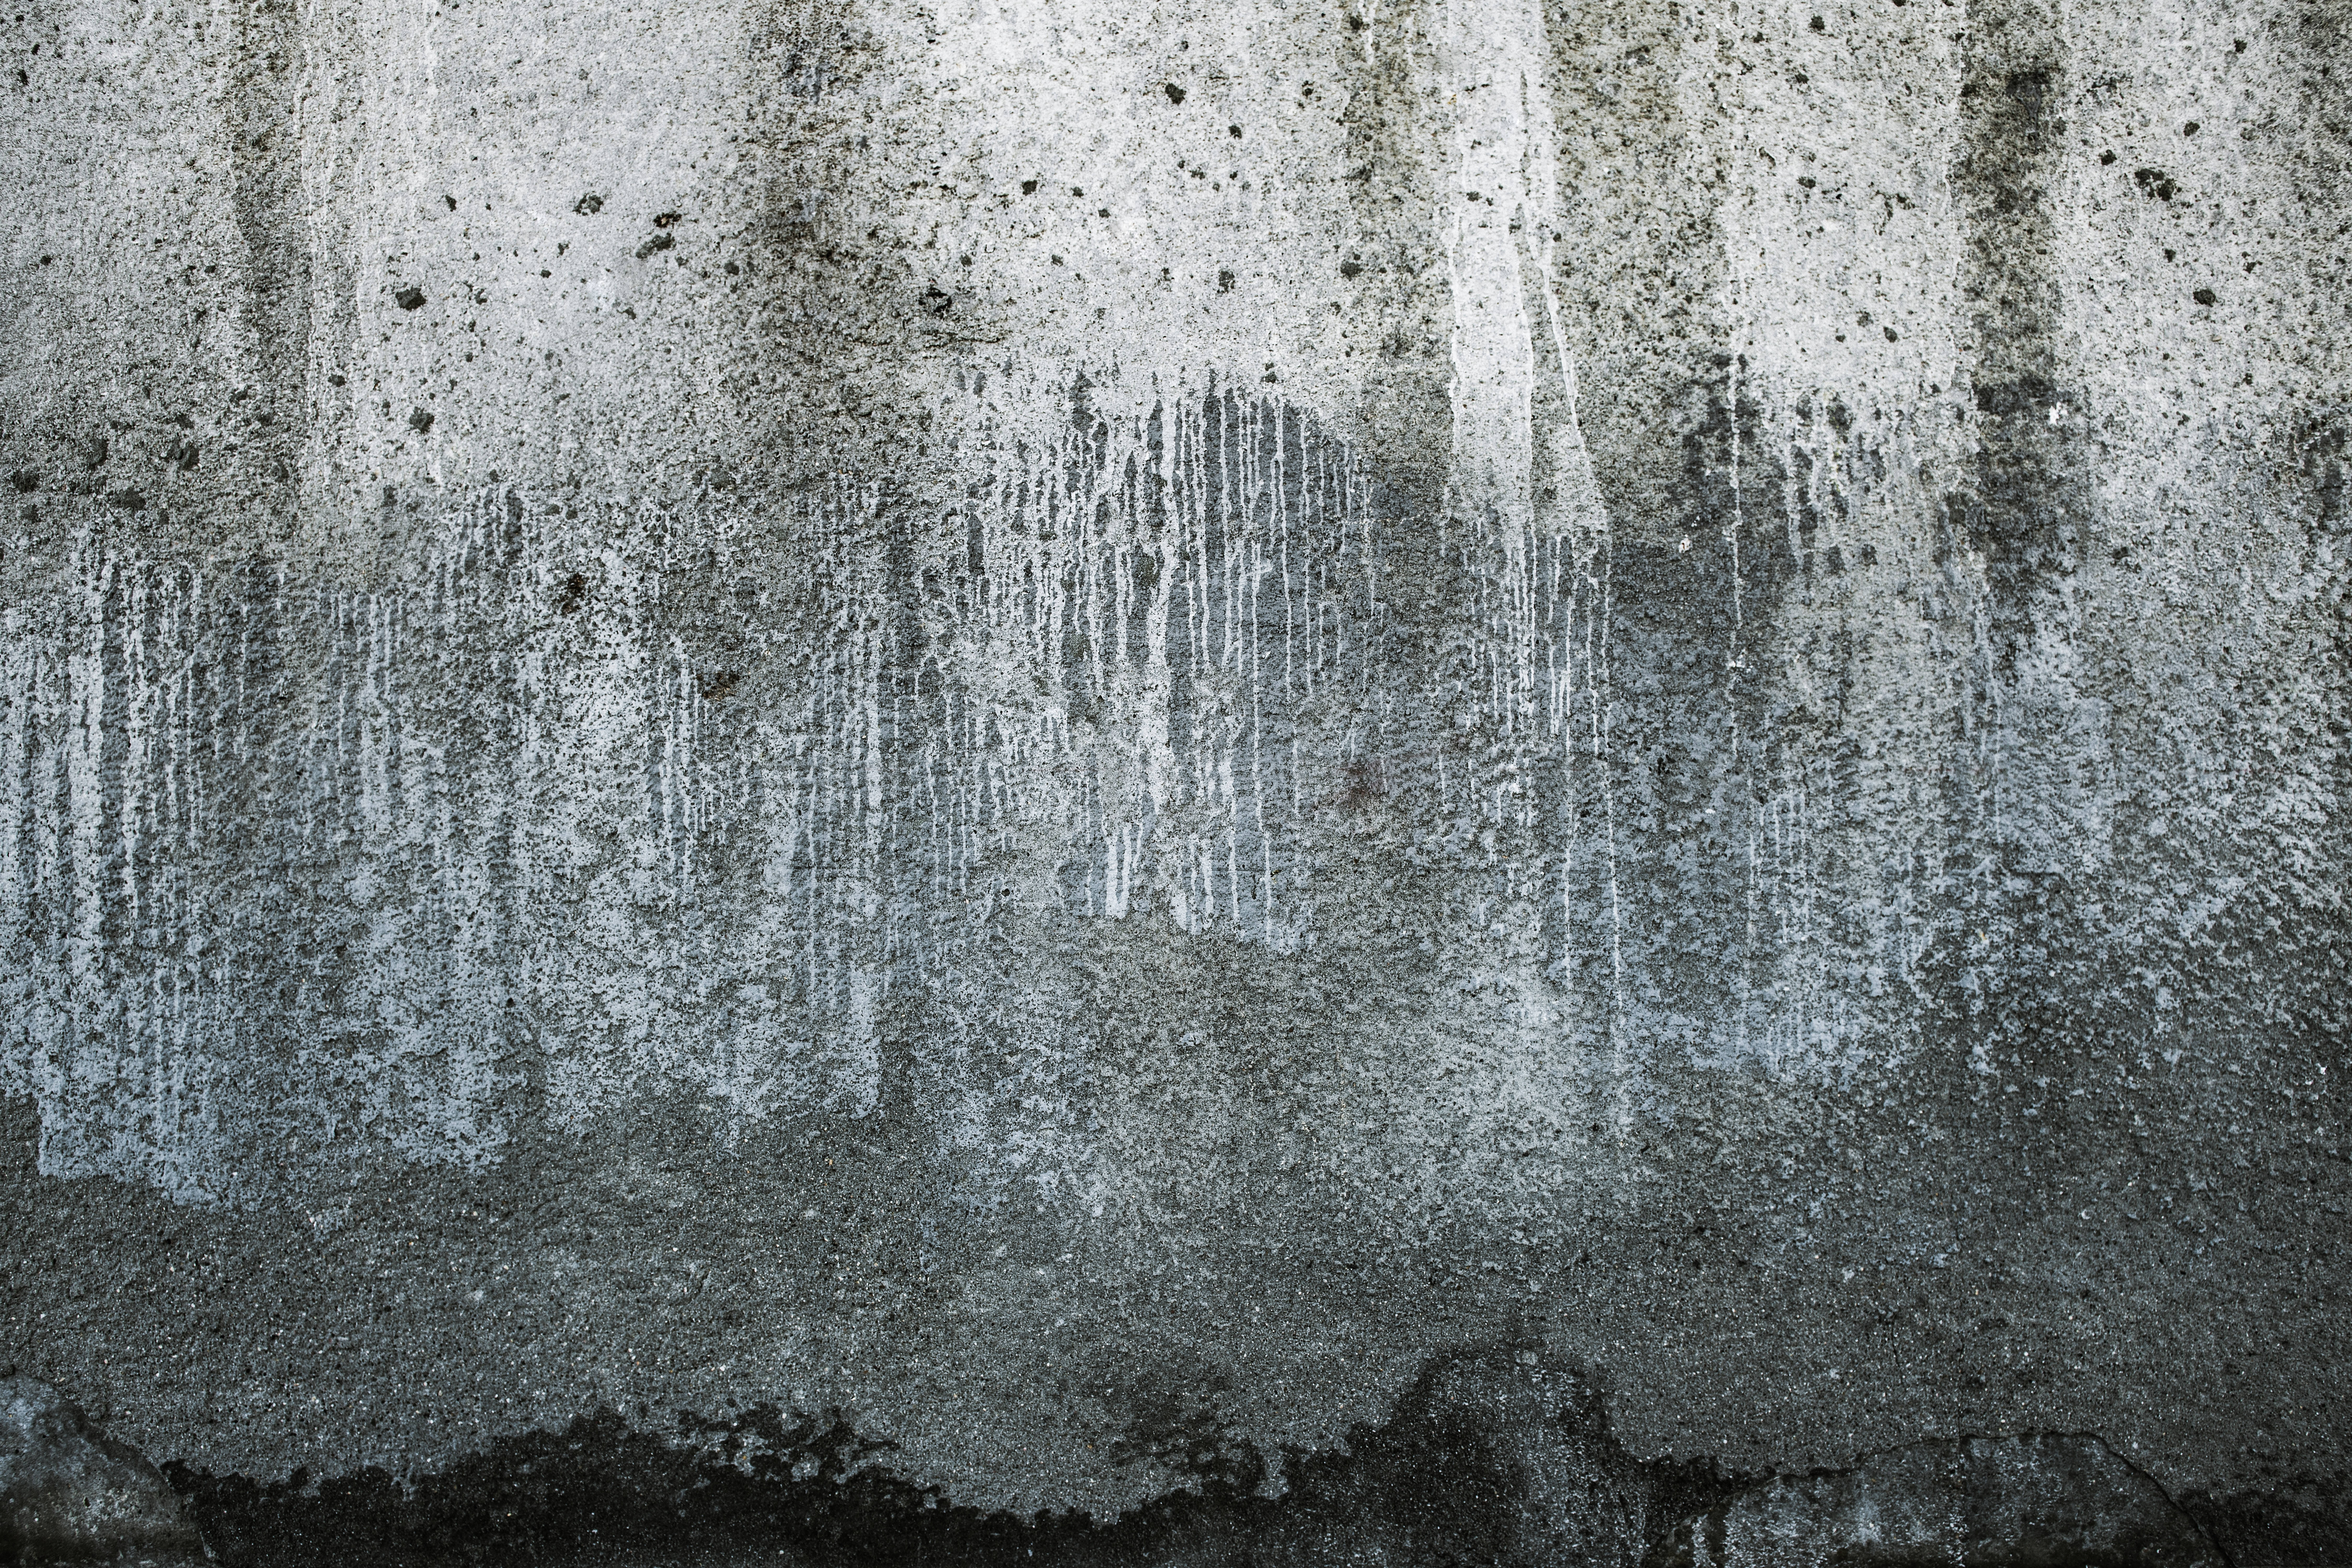 Mossy And Grunge Texture Concrete Background